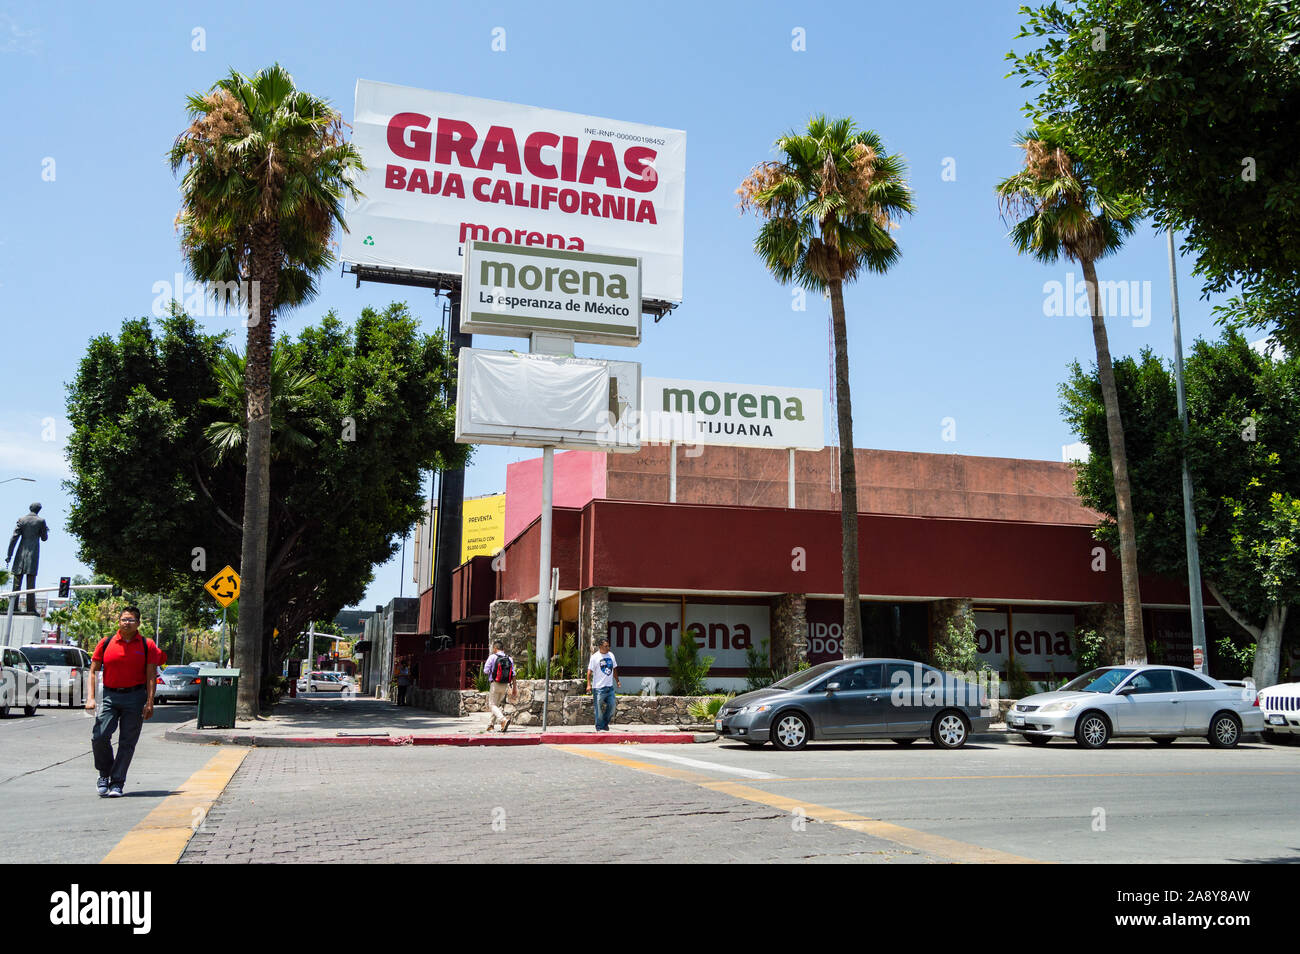 TIJUANA, MEXICO - 07/22: Tijuana offices of the government political party,  Morena, with billboard thanking the residents of Baja California for votin  Stock Photo - Alamy